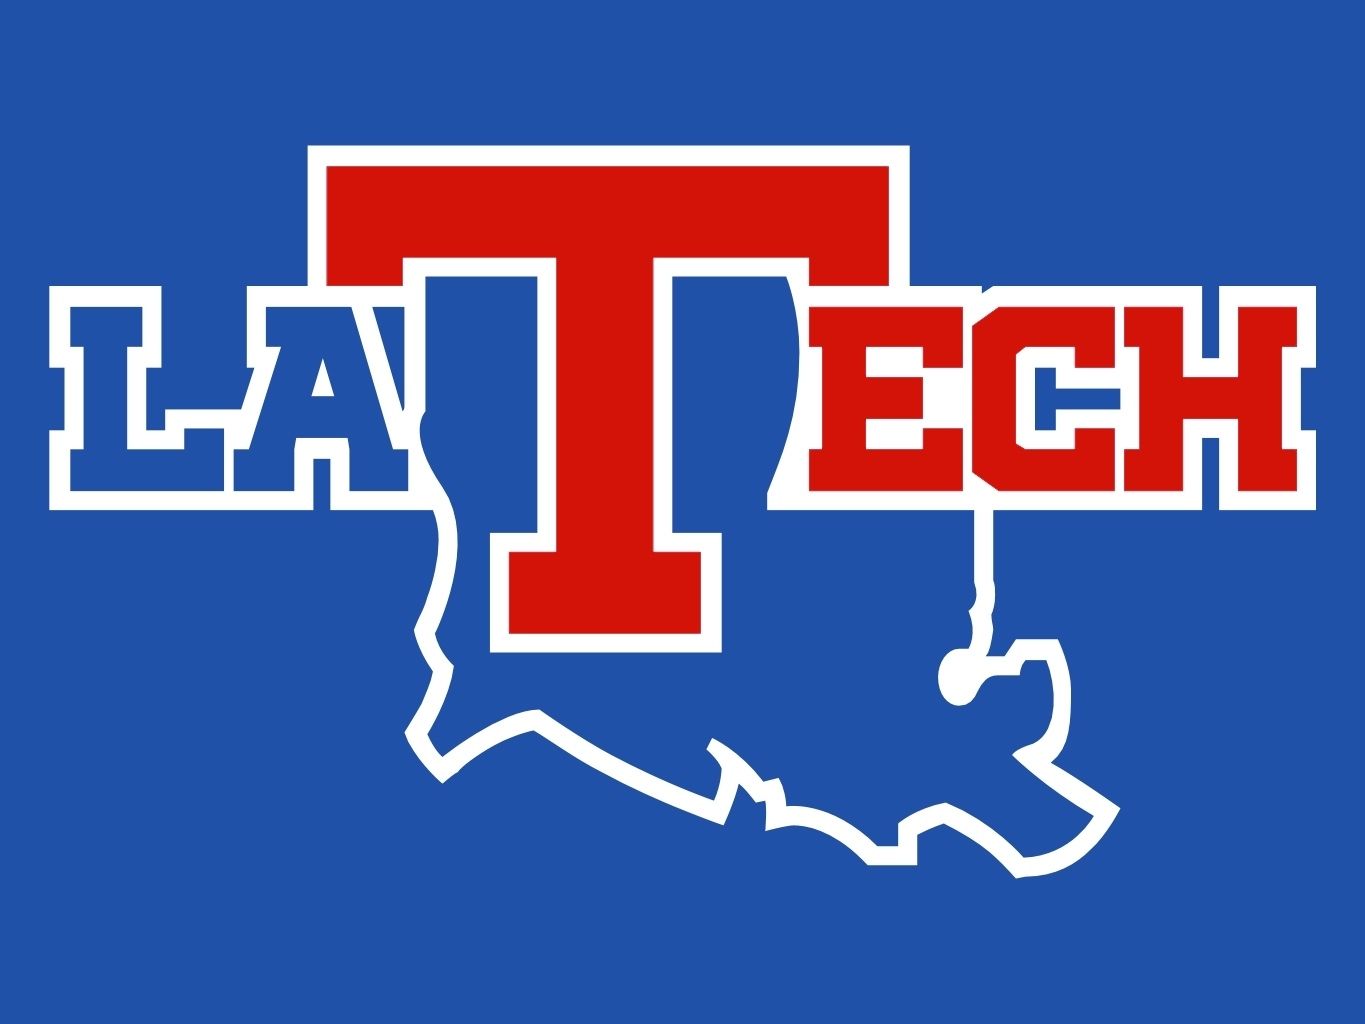 Louisiana Tech Bulldogs enter NIT for 10th time taking on ‘Ole Miss